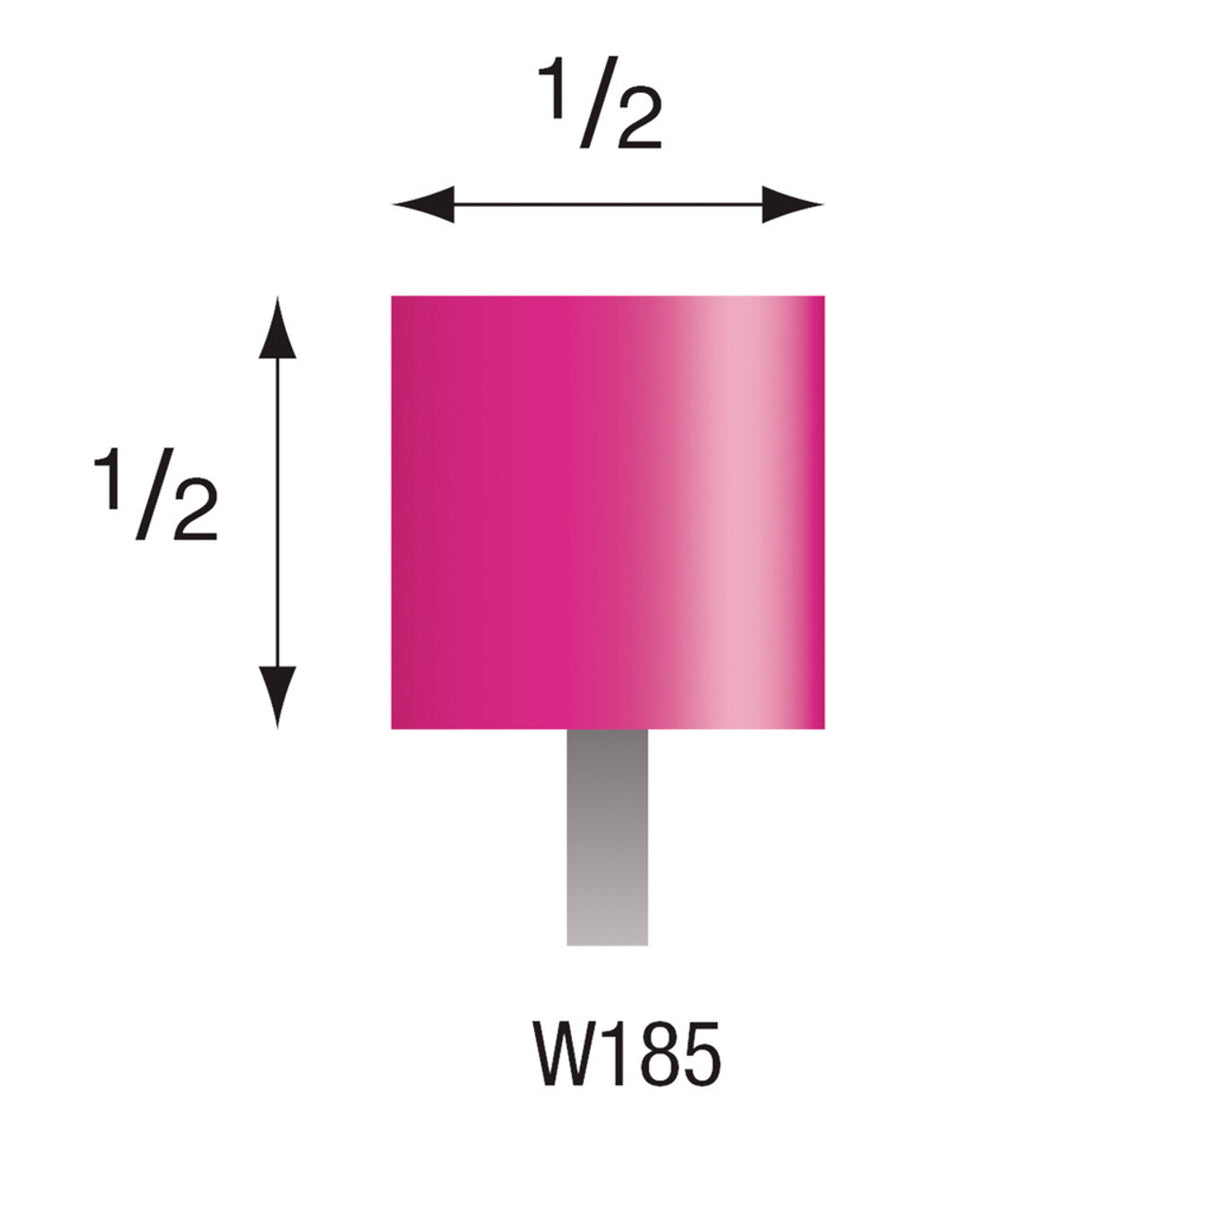 Pink Mounted Stones - Style "W"- 1/8" Shank (Pkg. of 24)